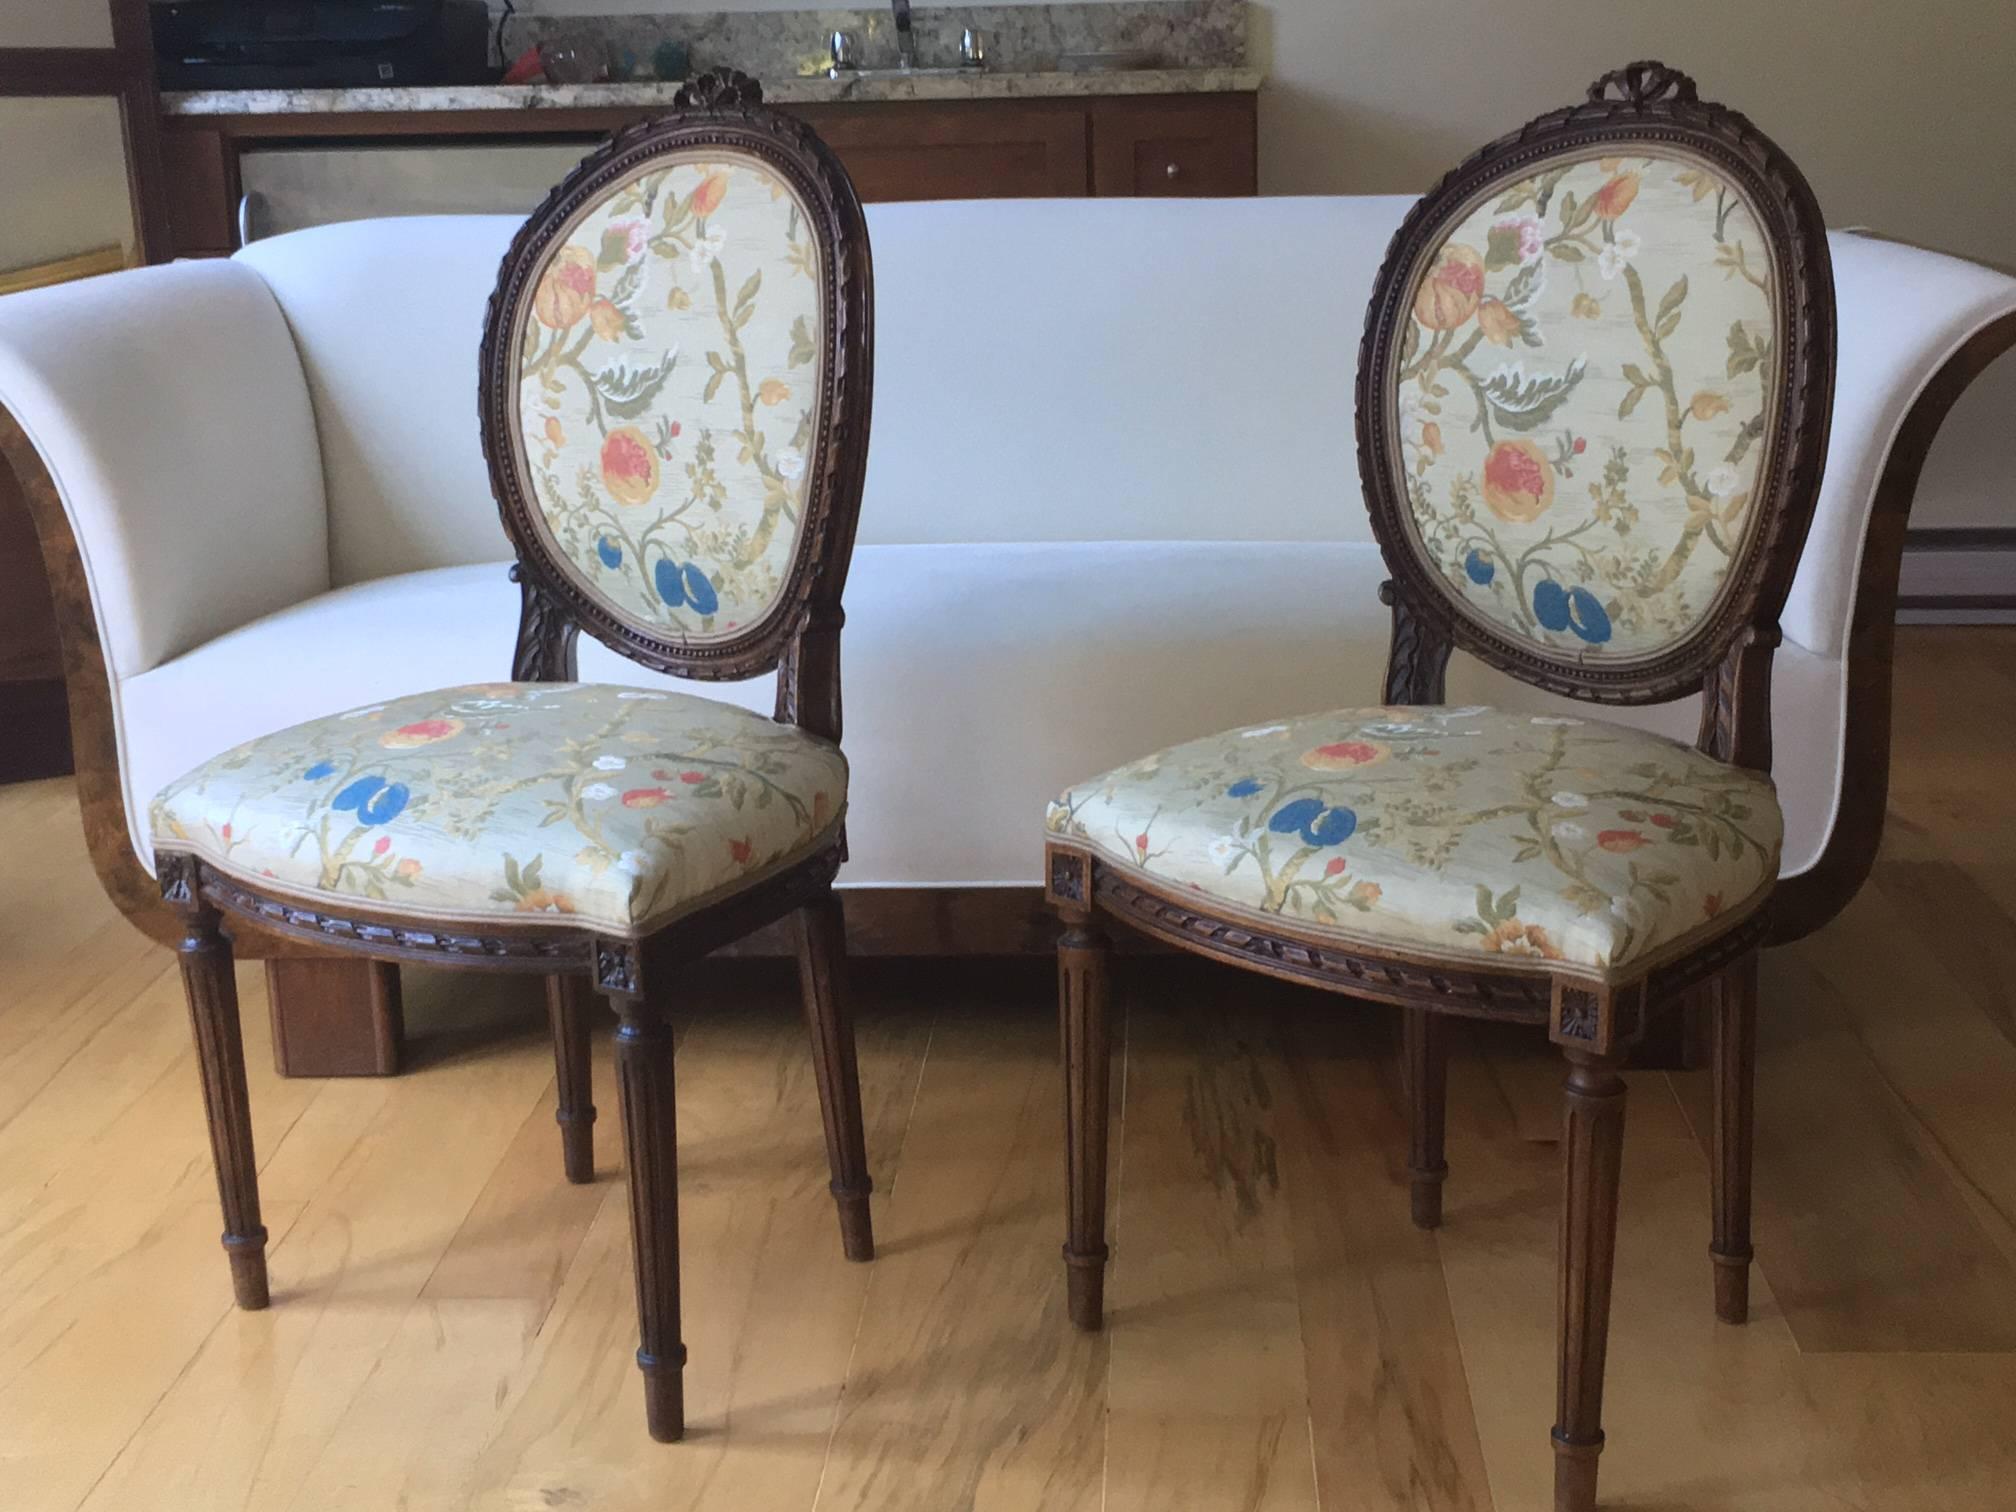 Exquisite pair of hand-carved Louis XVI style side chairs of walnut. Crest carved with ribbon ties, on fluted legs. Possibly Northern Italian, 19th century, circa 1850

Newly upholstered in a gorgeous Stark Lampas Giardino Paradiso, fruits and